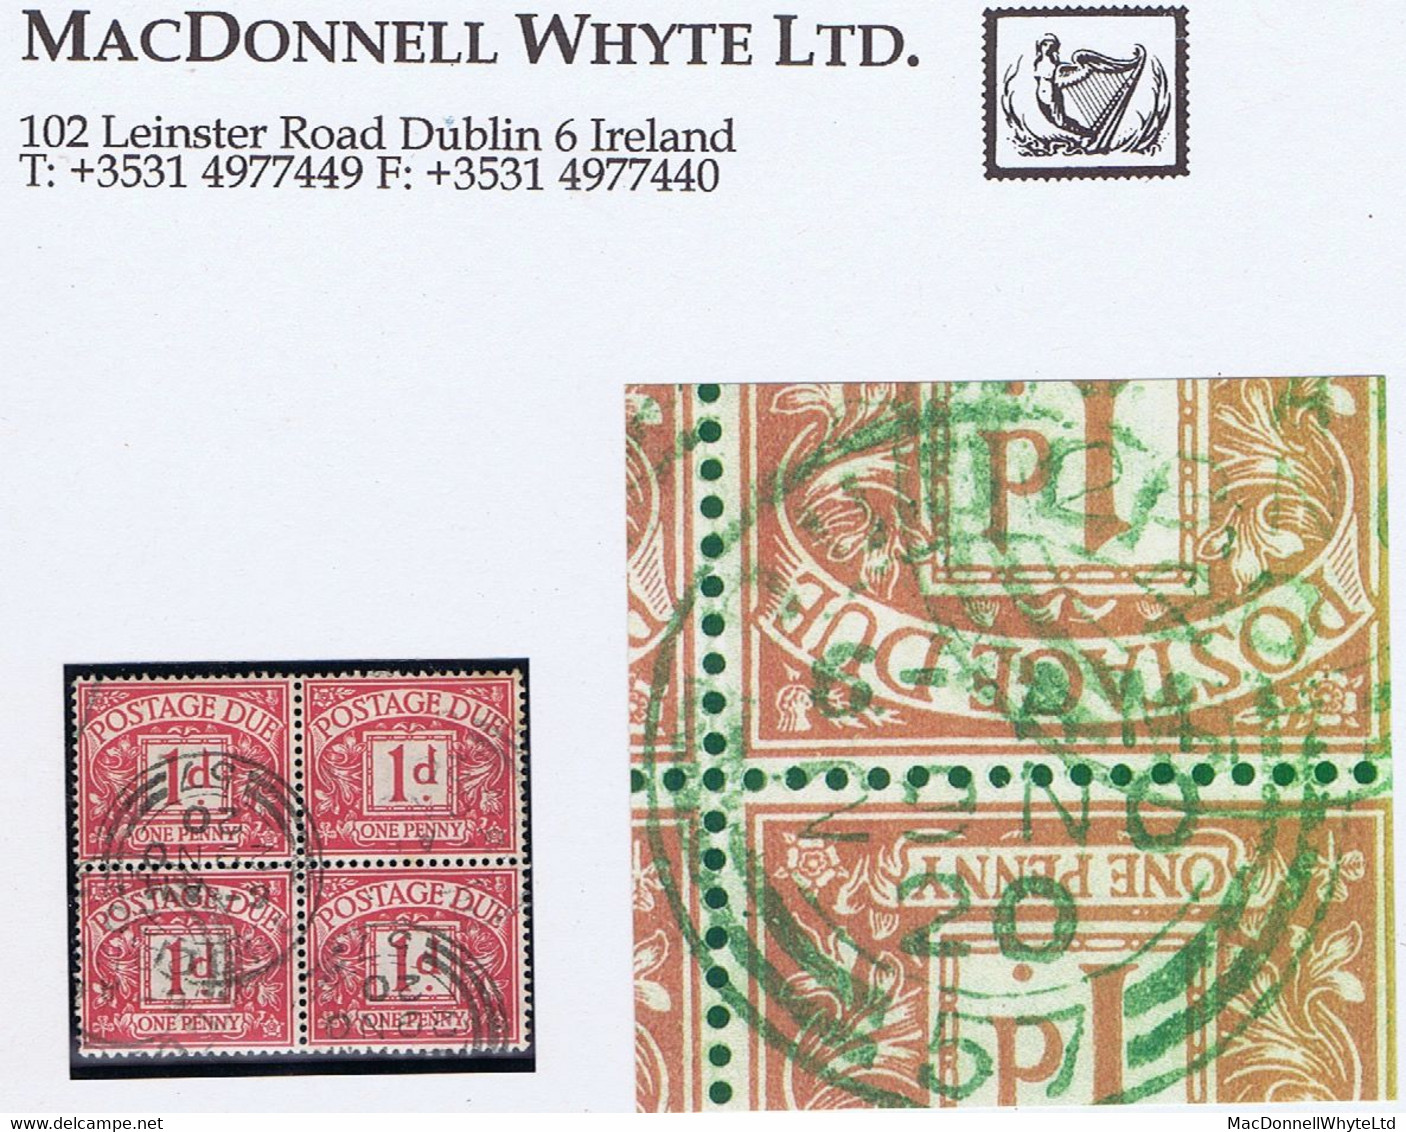 Ireland Postage Due 1920 British POSTAGE DUE 1d Block Of 4 Used With Cds DUBLIN 29 NO 20 Code 57 - Timbres-taxe